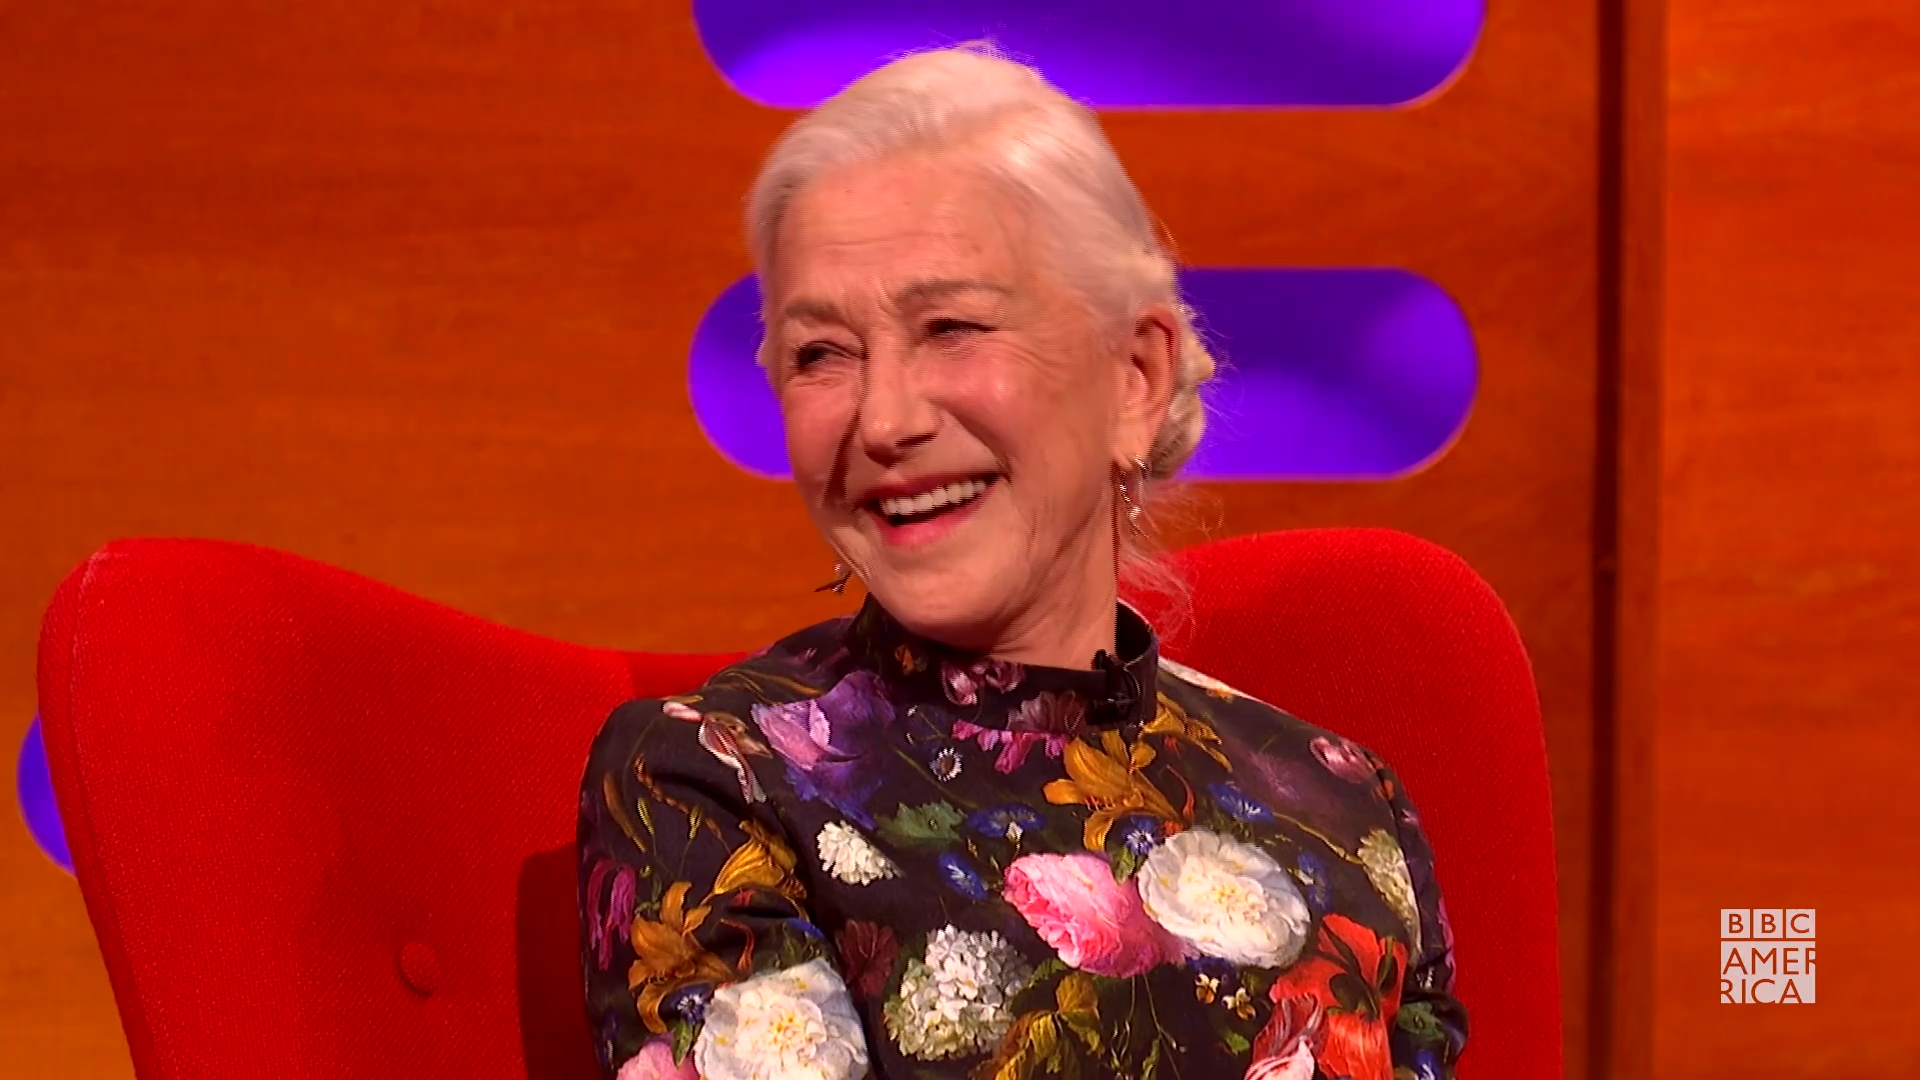 Watch Dame Helen Mirren’s Home Video with a Bear | The Graham Norton Show Video Extras